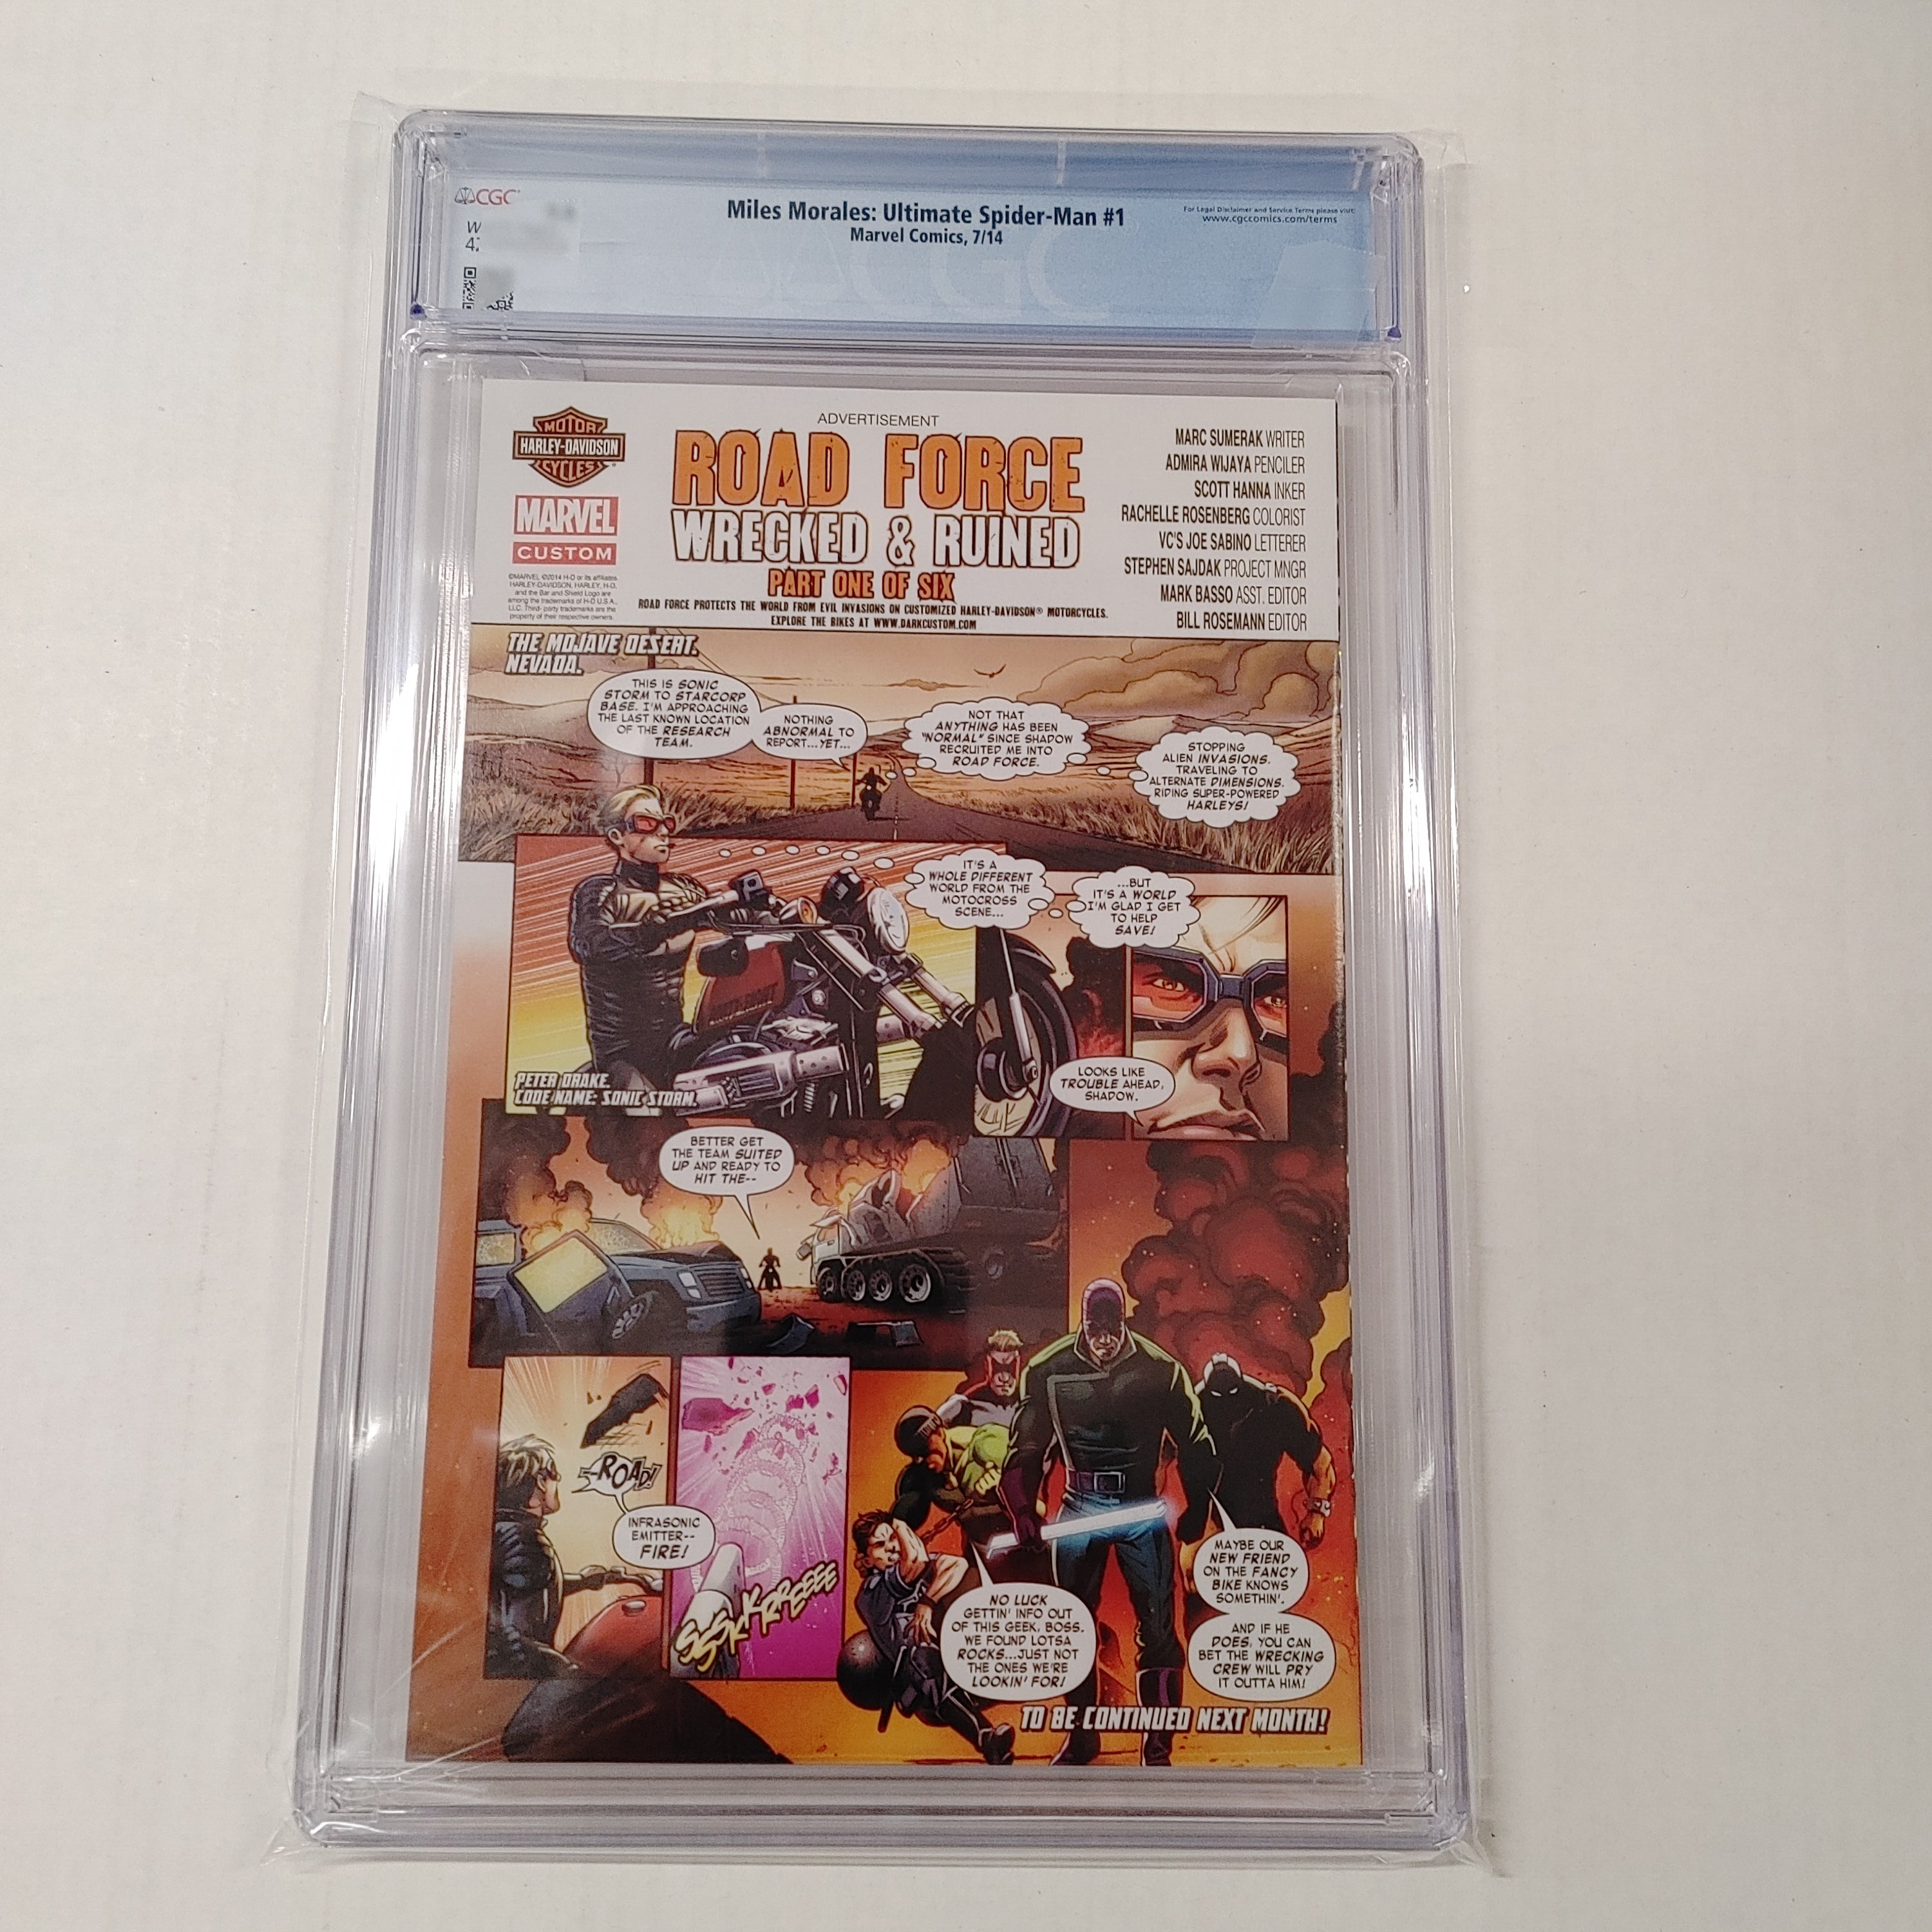 MILES MORALES: THE ULTIMATE SPIDER-MAN #1 CGC 9.8 | L.A. Mood Comics and Games